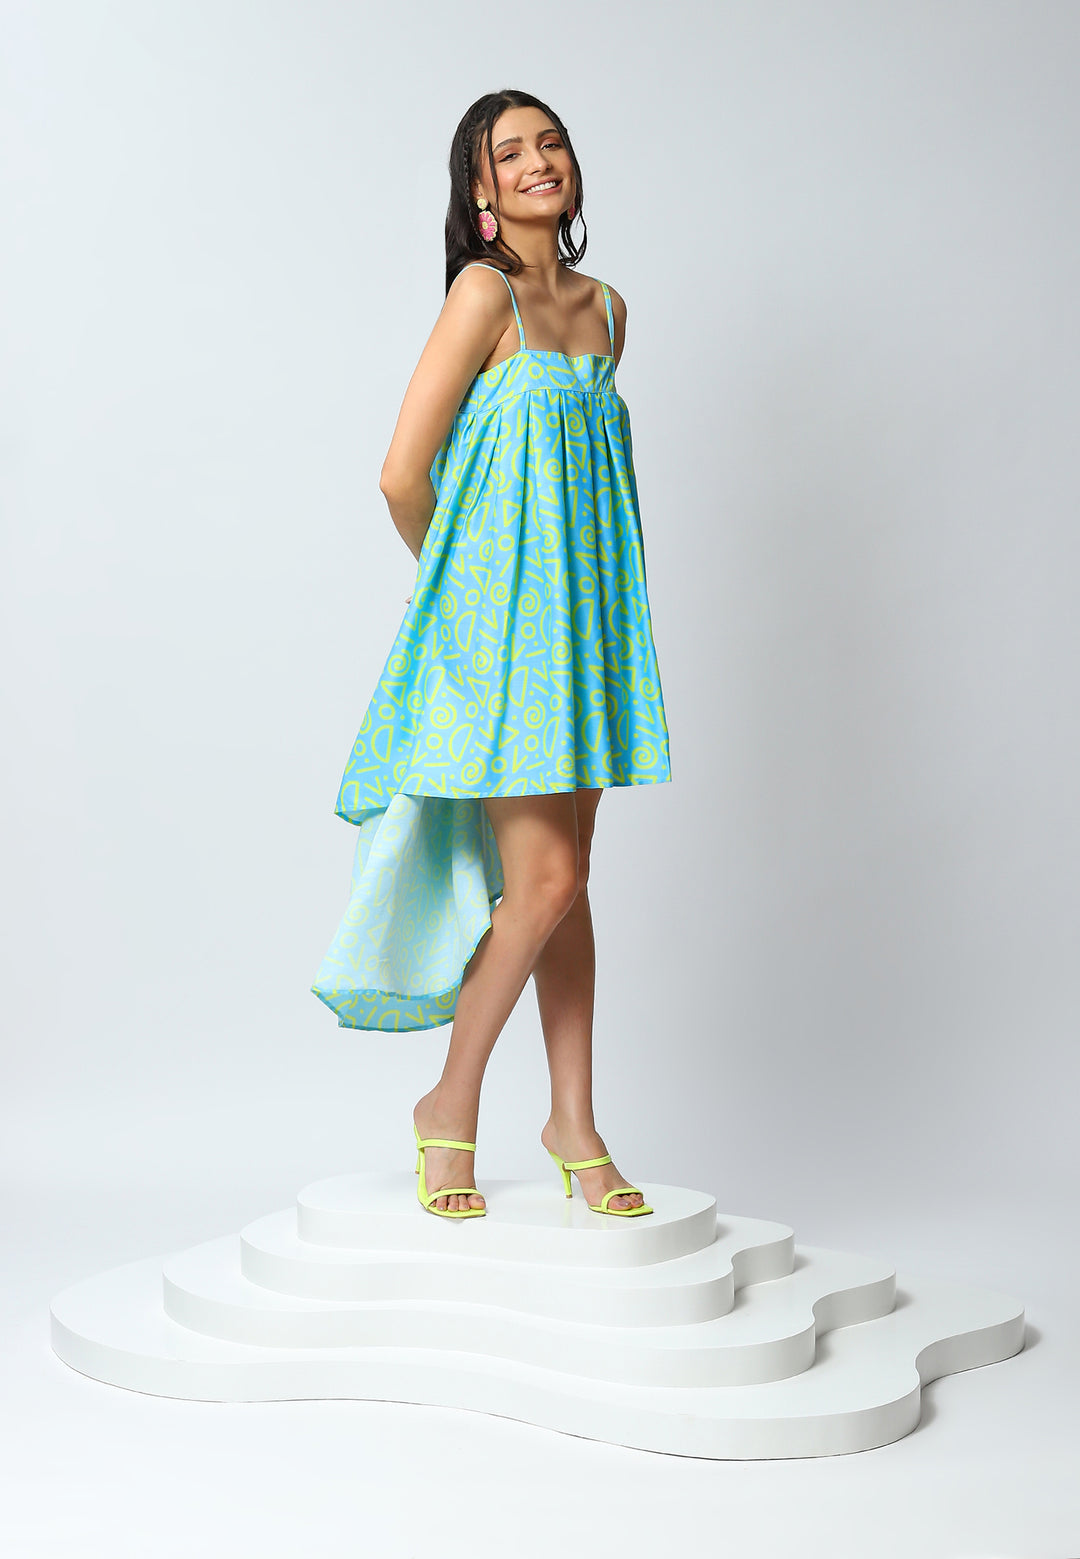 Buenos Aires 'Tango Enchantment' High-Low Dress